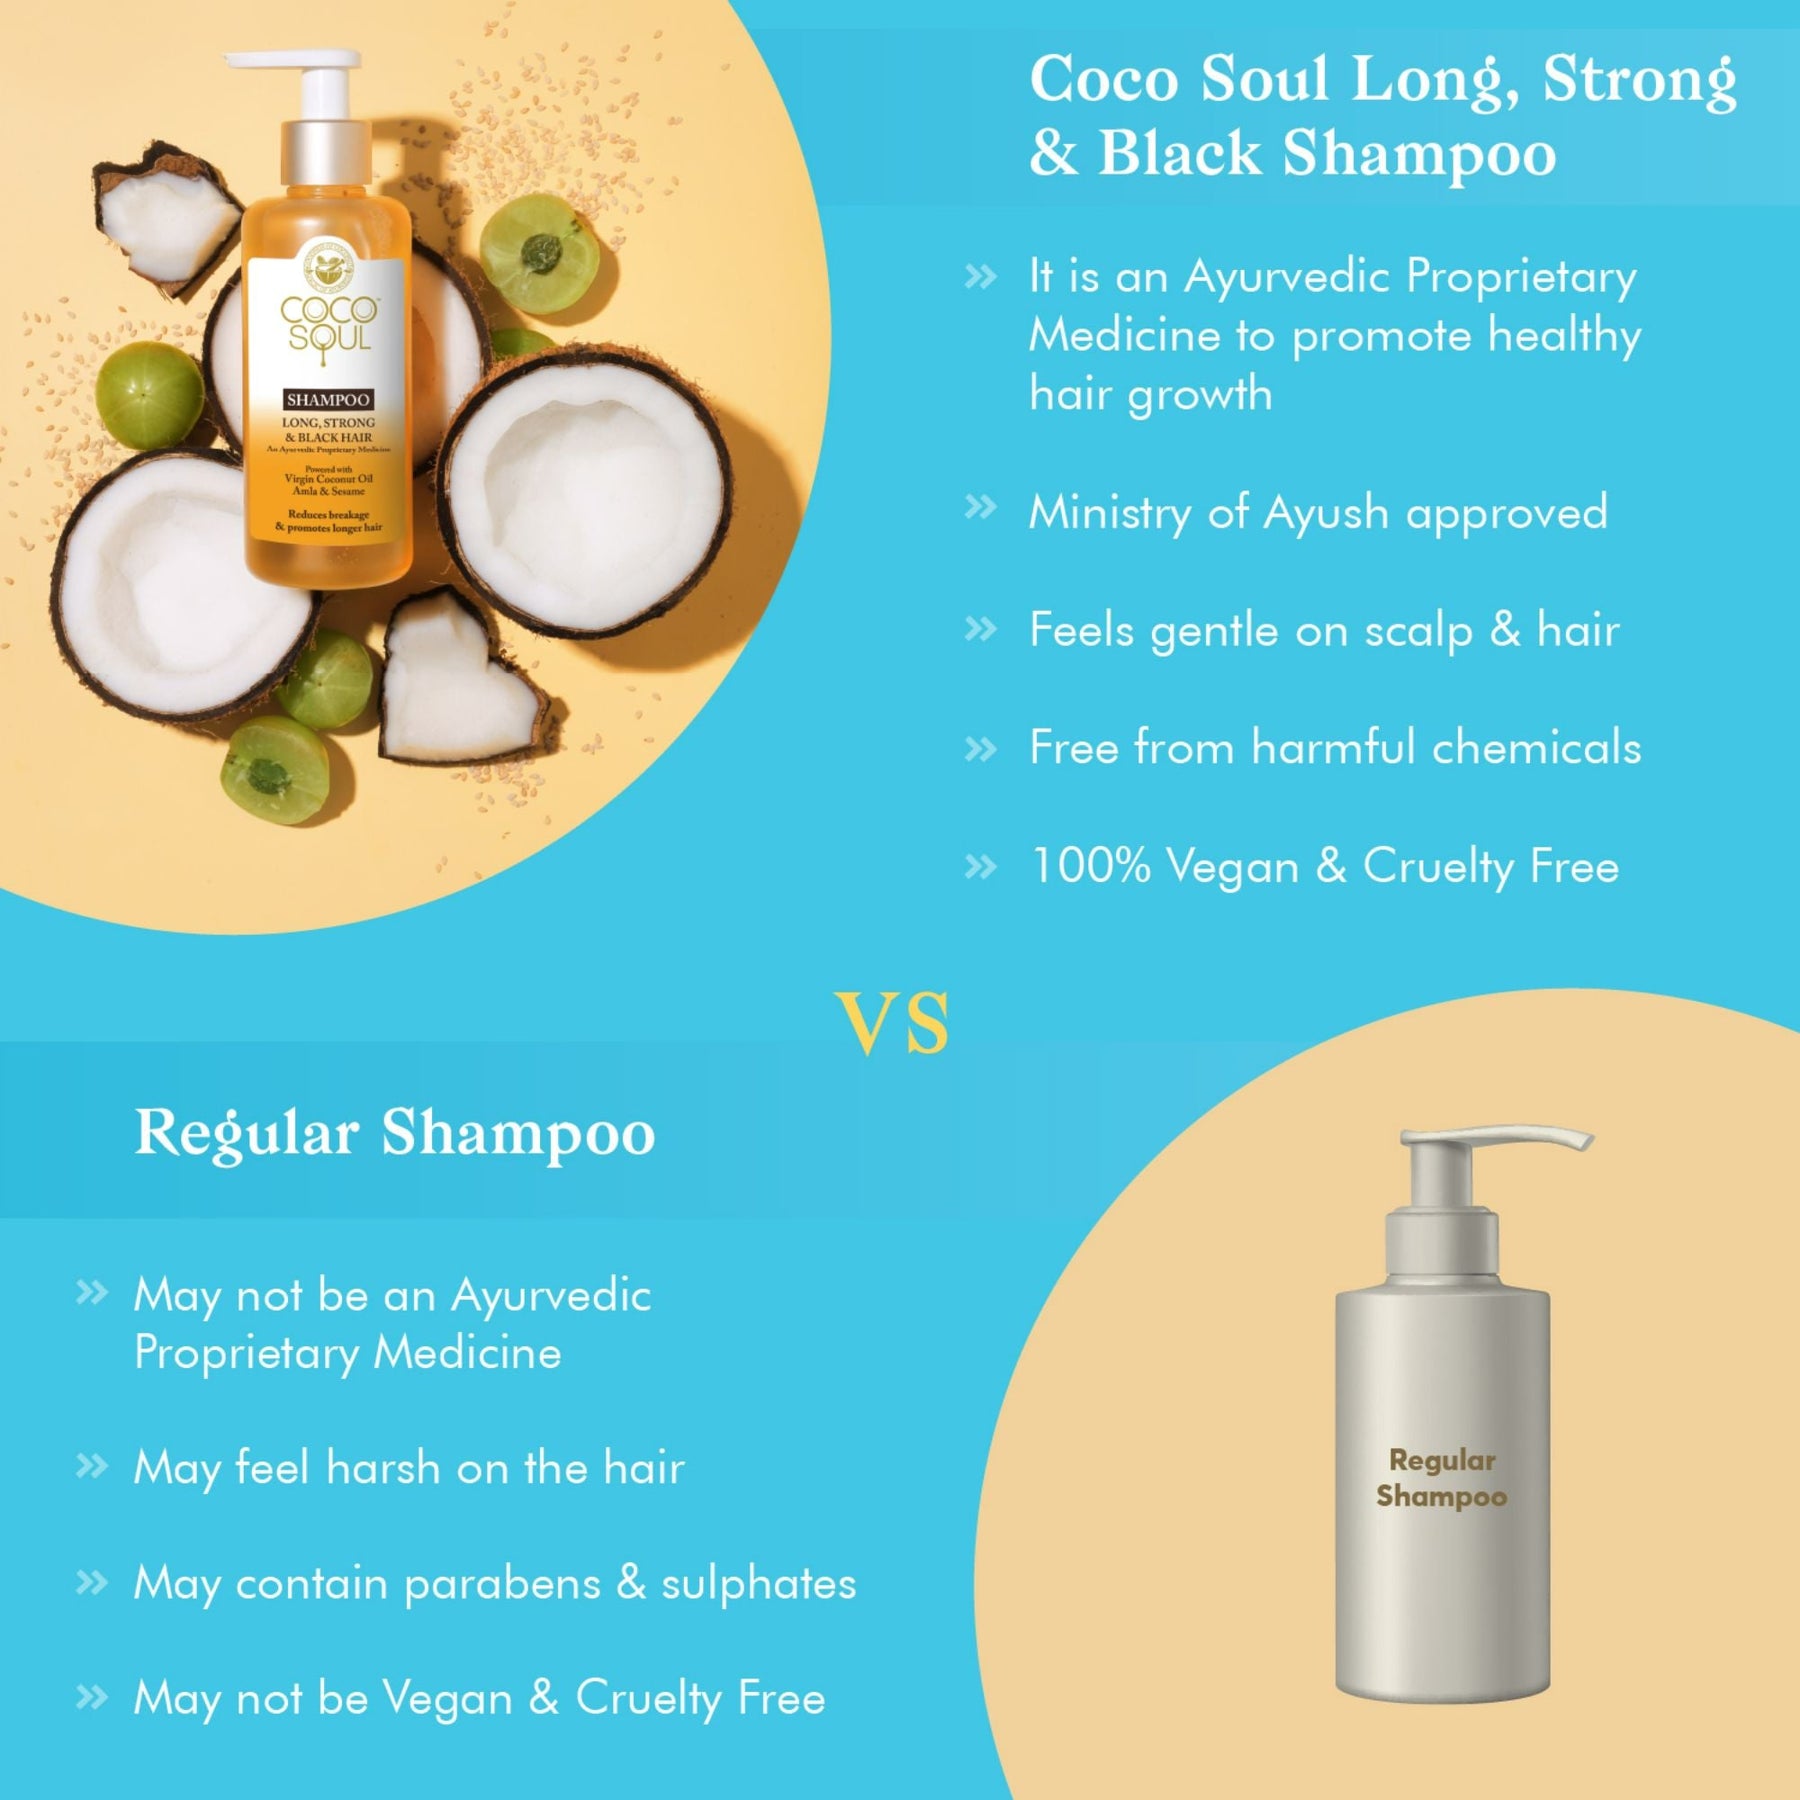 [CRED] Long, Strong & Black Shampoo | with 100% Cold Pressed Virgin Coconut Oil, Amla & Sesame | Sulphate & Paraben Free | From the makers of Parachute Advansed |Ayurvedic Proprietary Medicine | 200ml